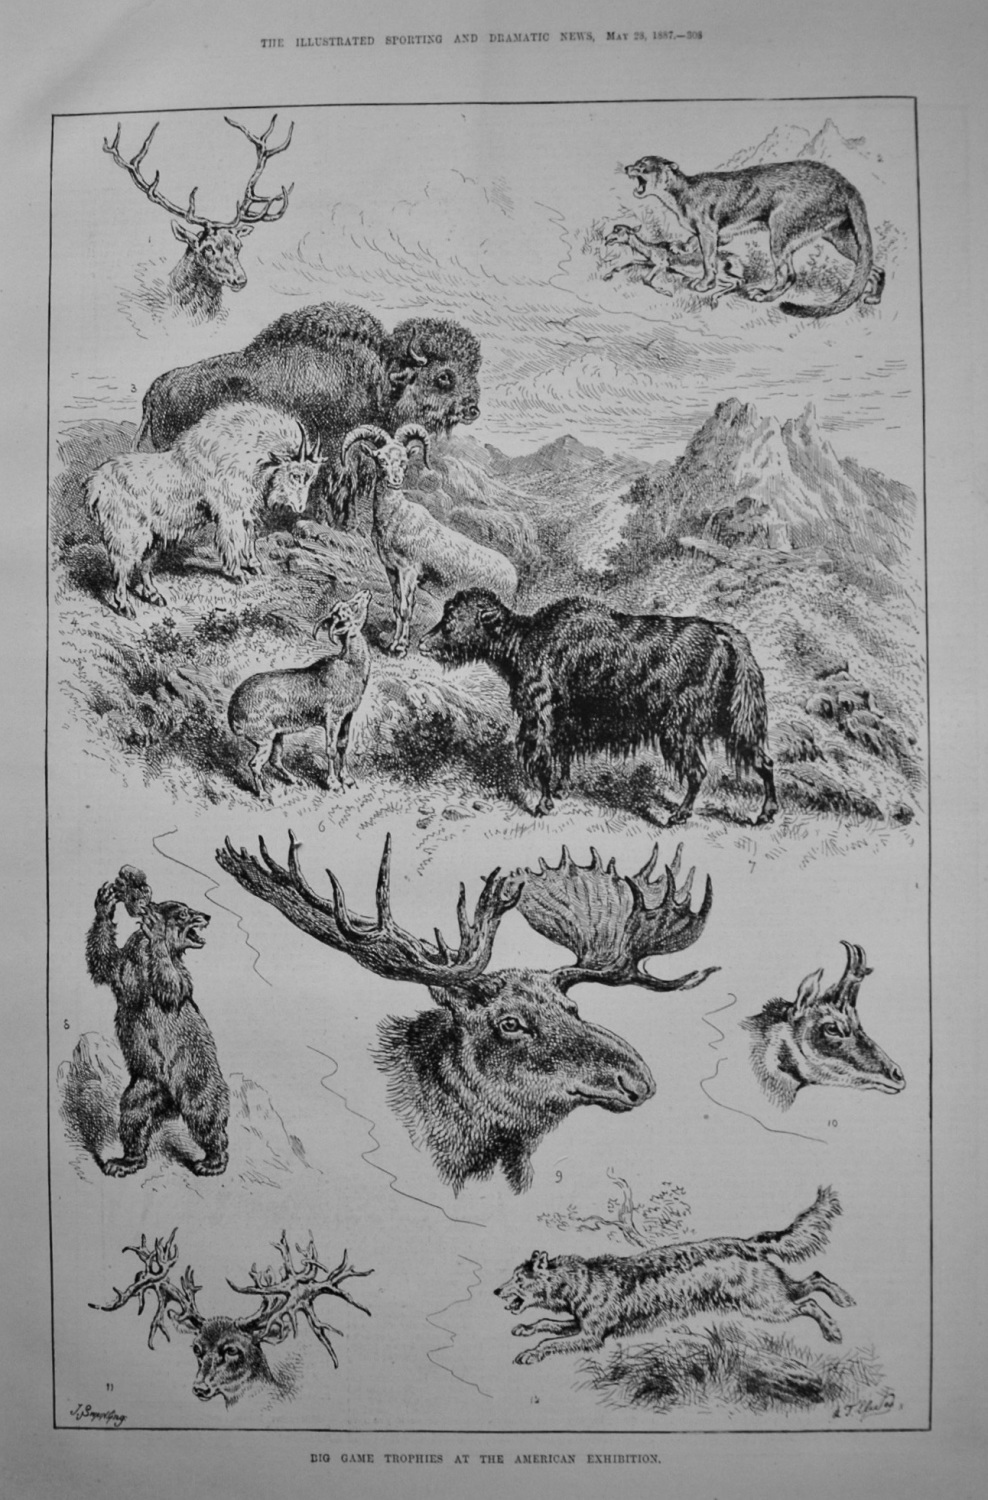 Big Game Trophies at the American Exhibition. 1887